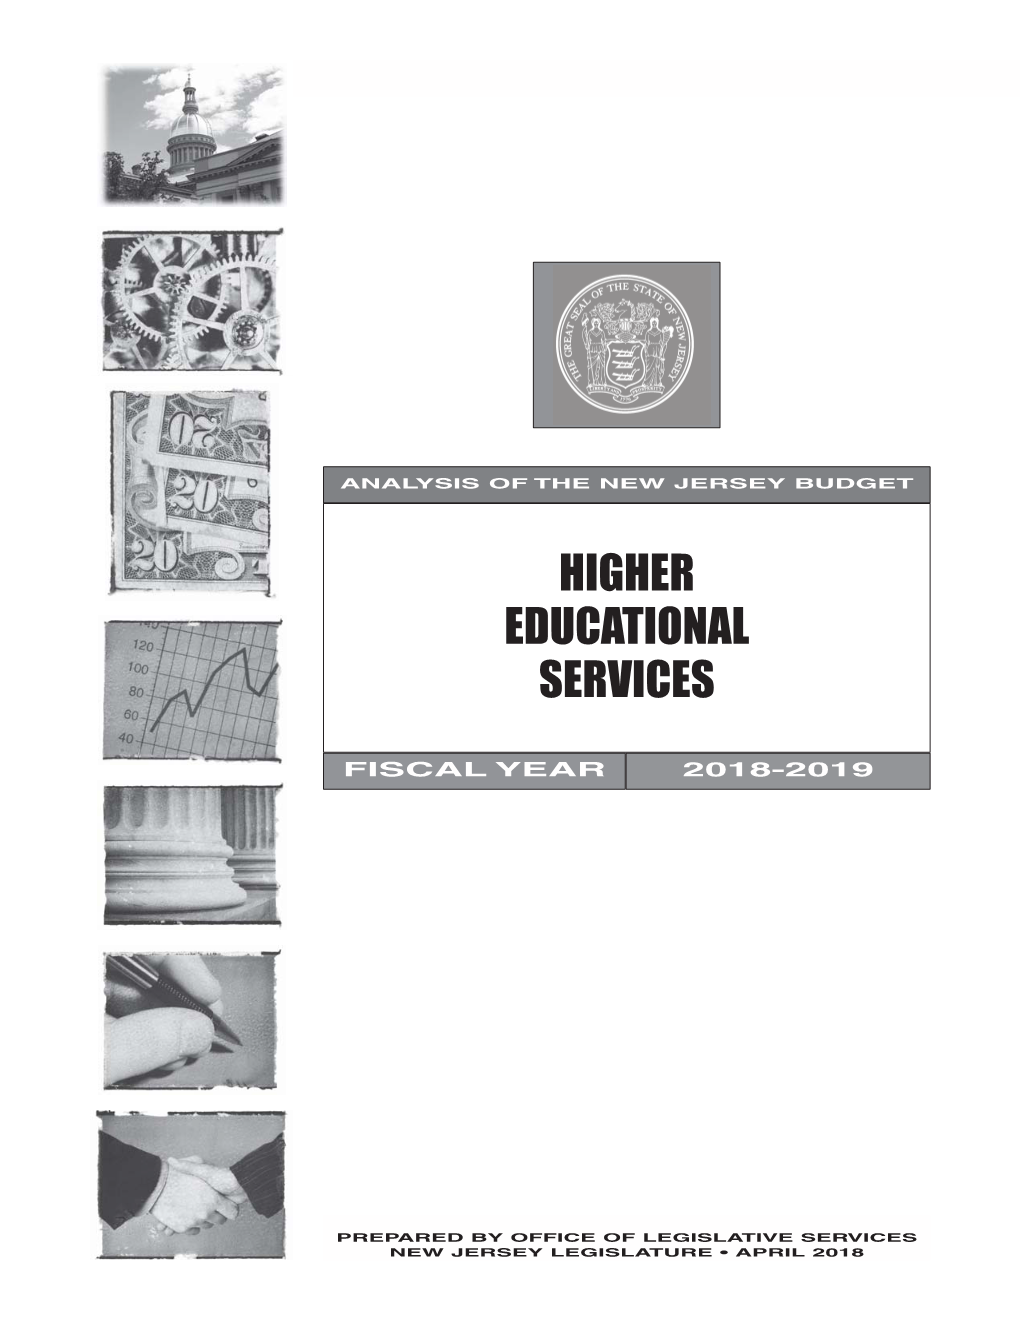 Higher Educational Services